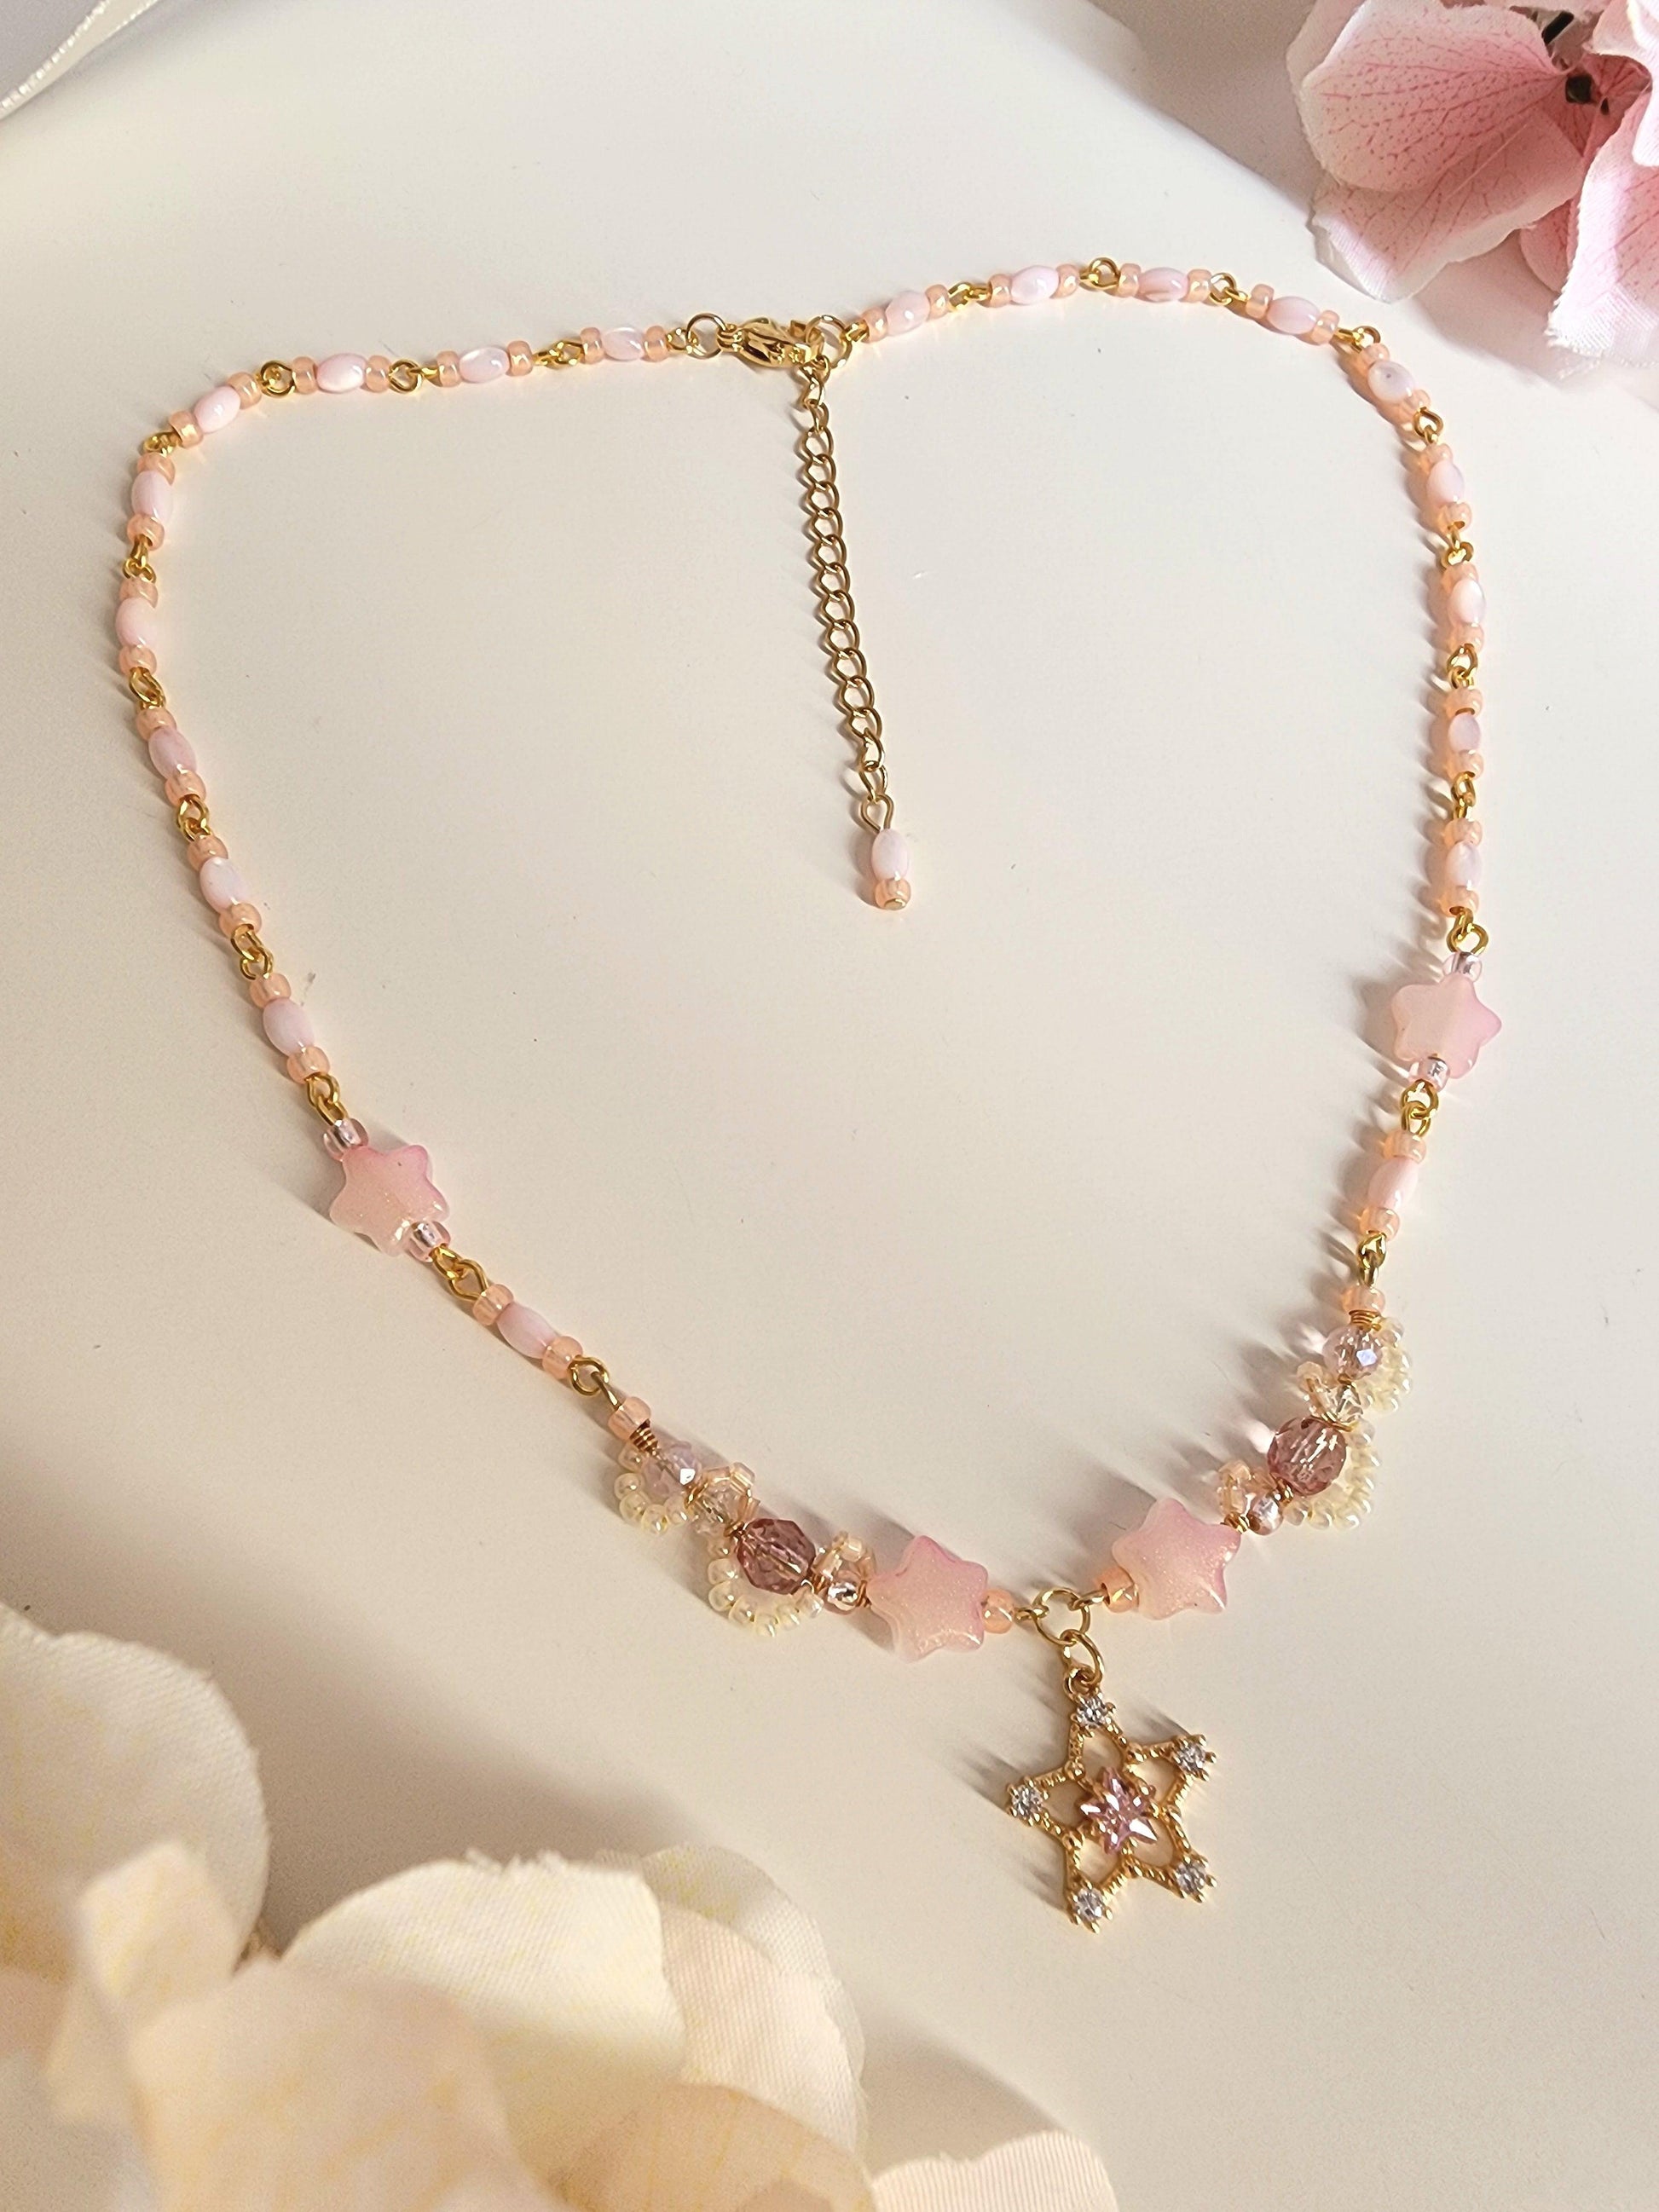 Cosmic Princess Necklace - By Cocoyu